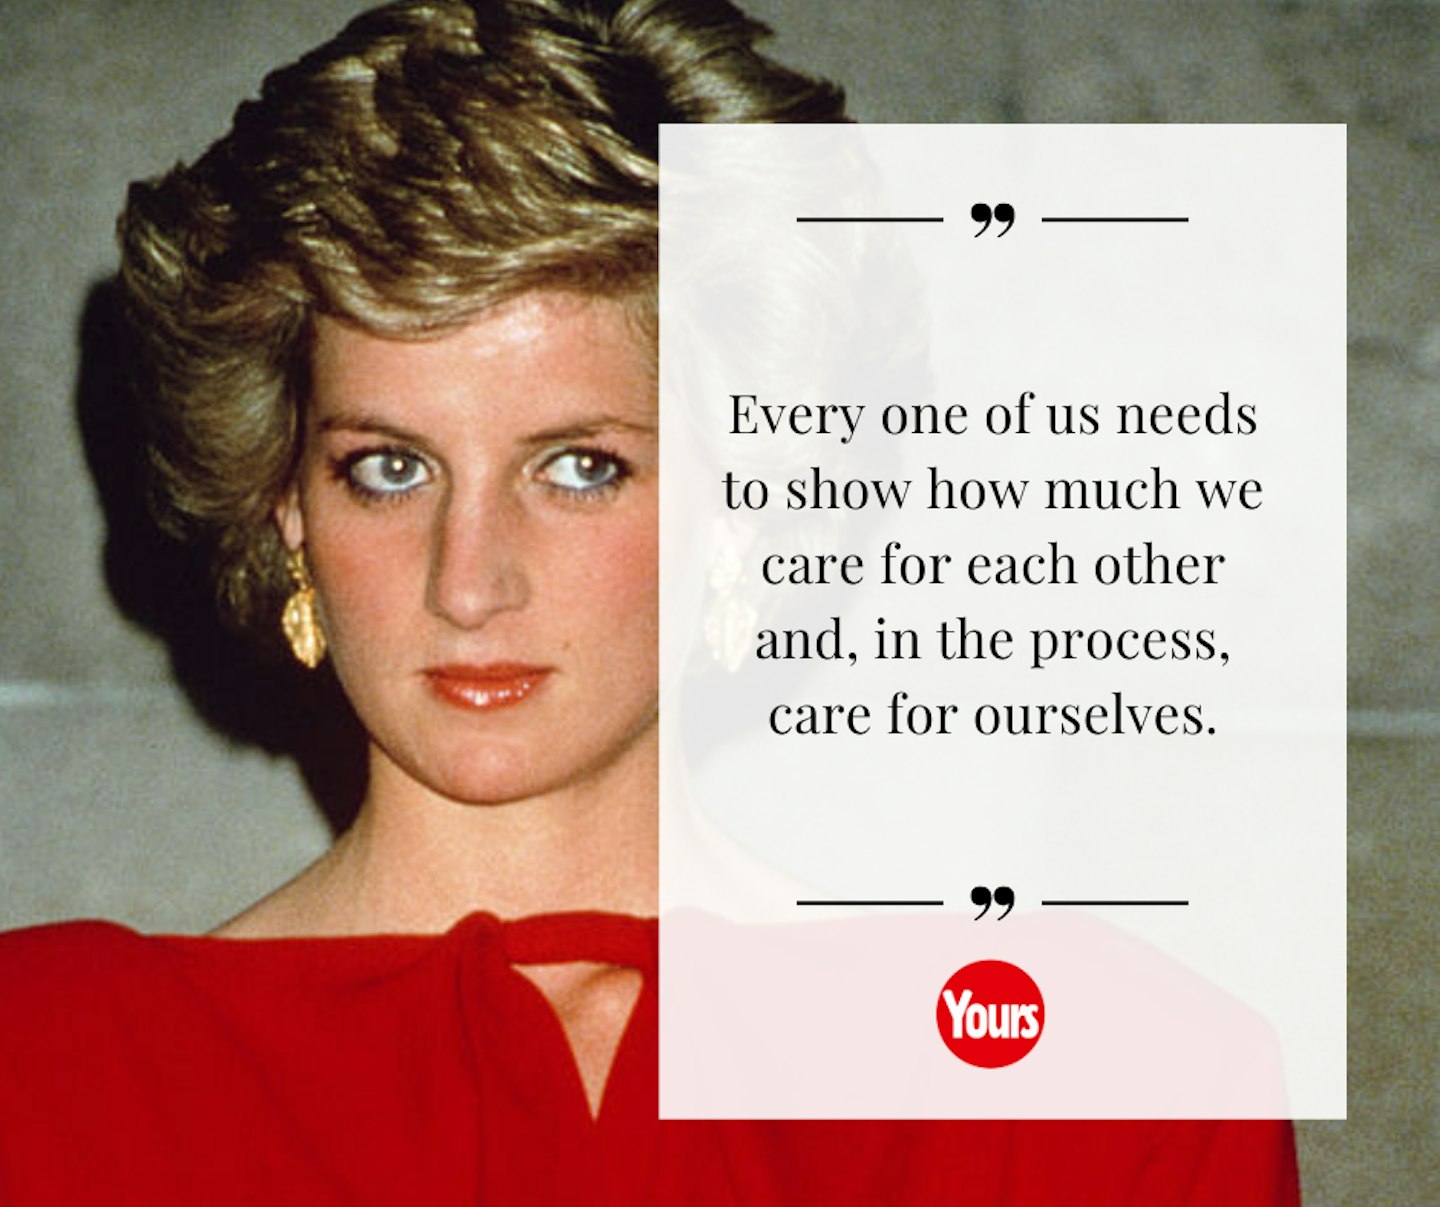 Princess Diana quote about caring for one another